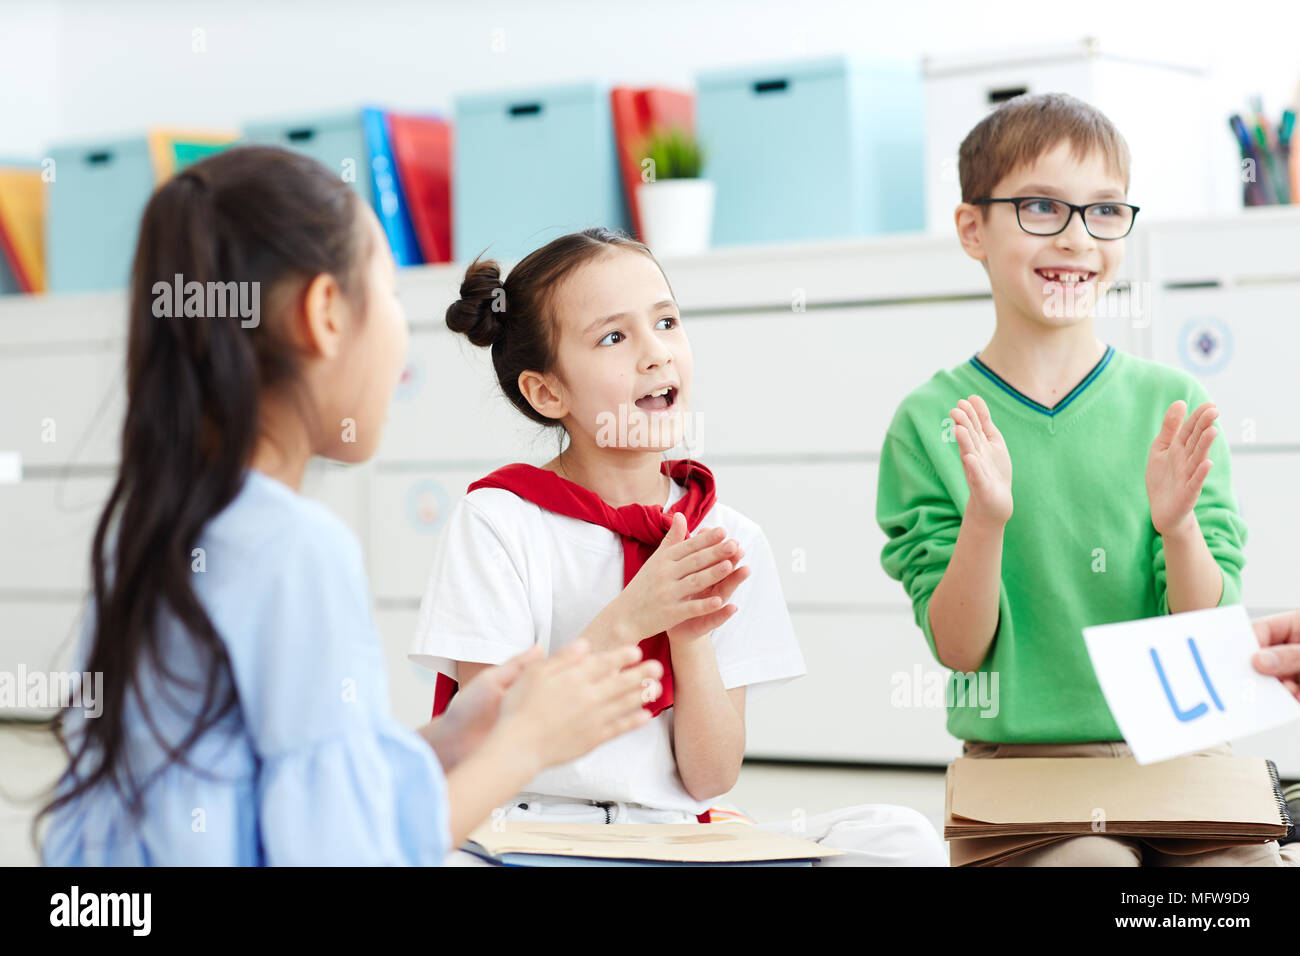 Group of elementary school kids singing songs and having fun while learning alphabet in classroom Stock Photo